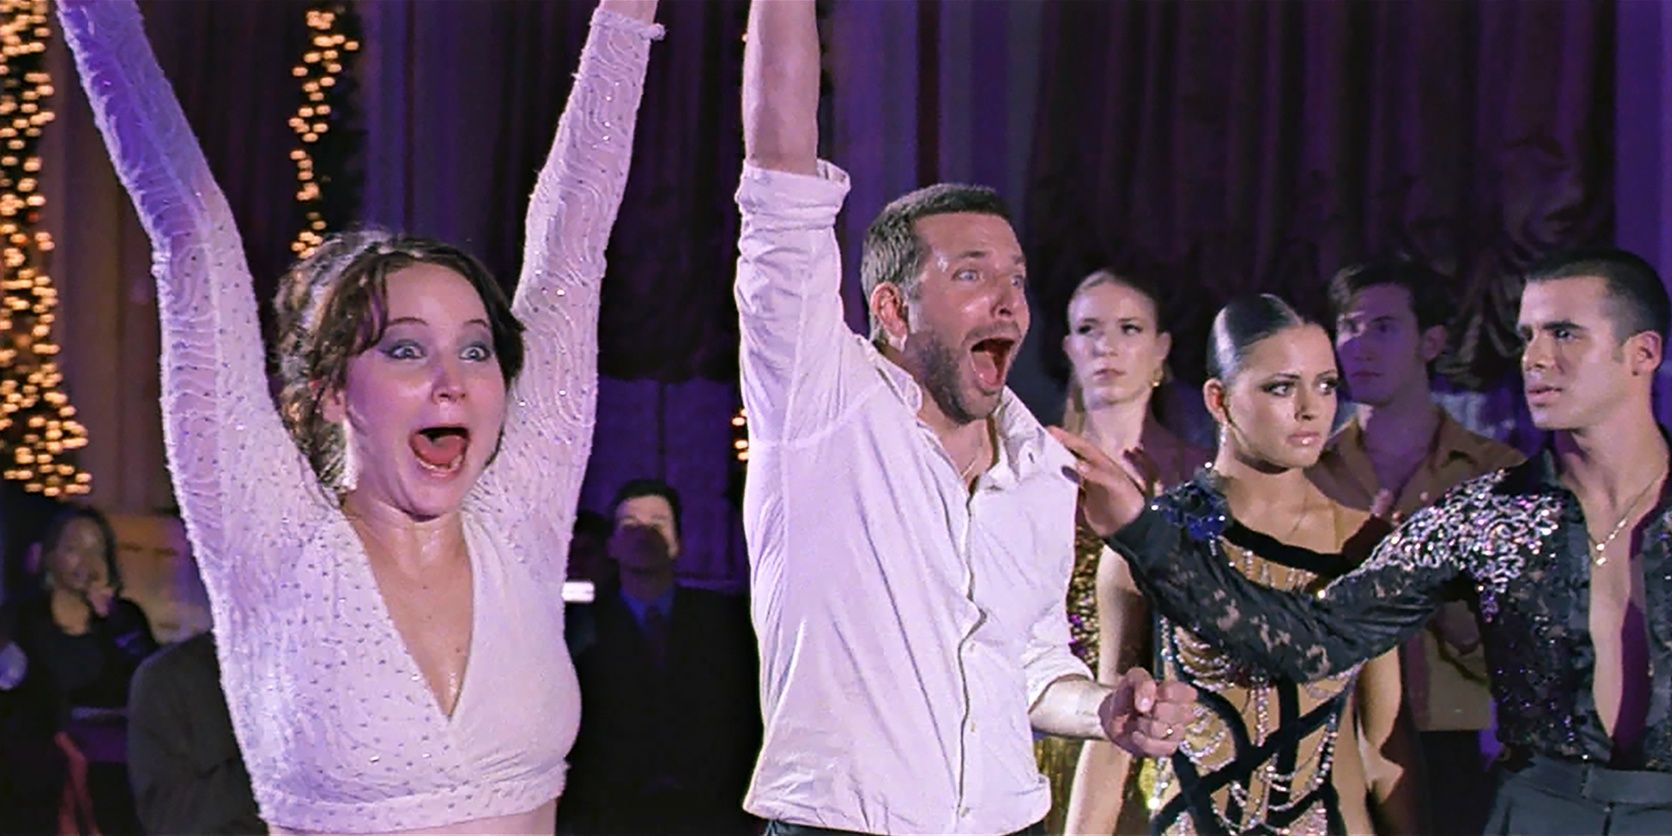 Pat and Tiffany cheering after winning the dance competition in Silver Linings Playbook